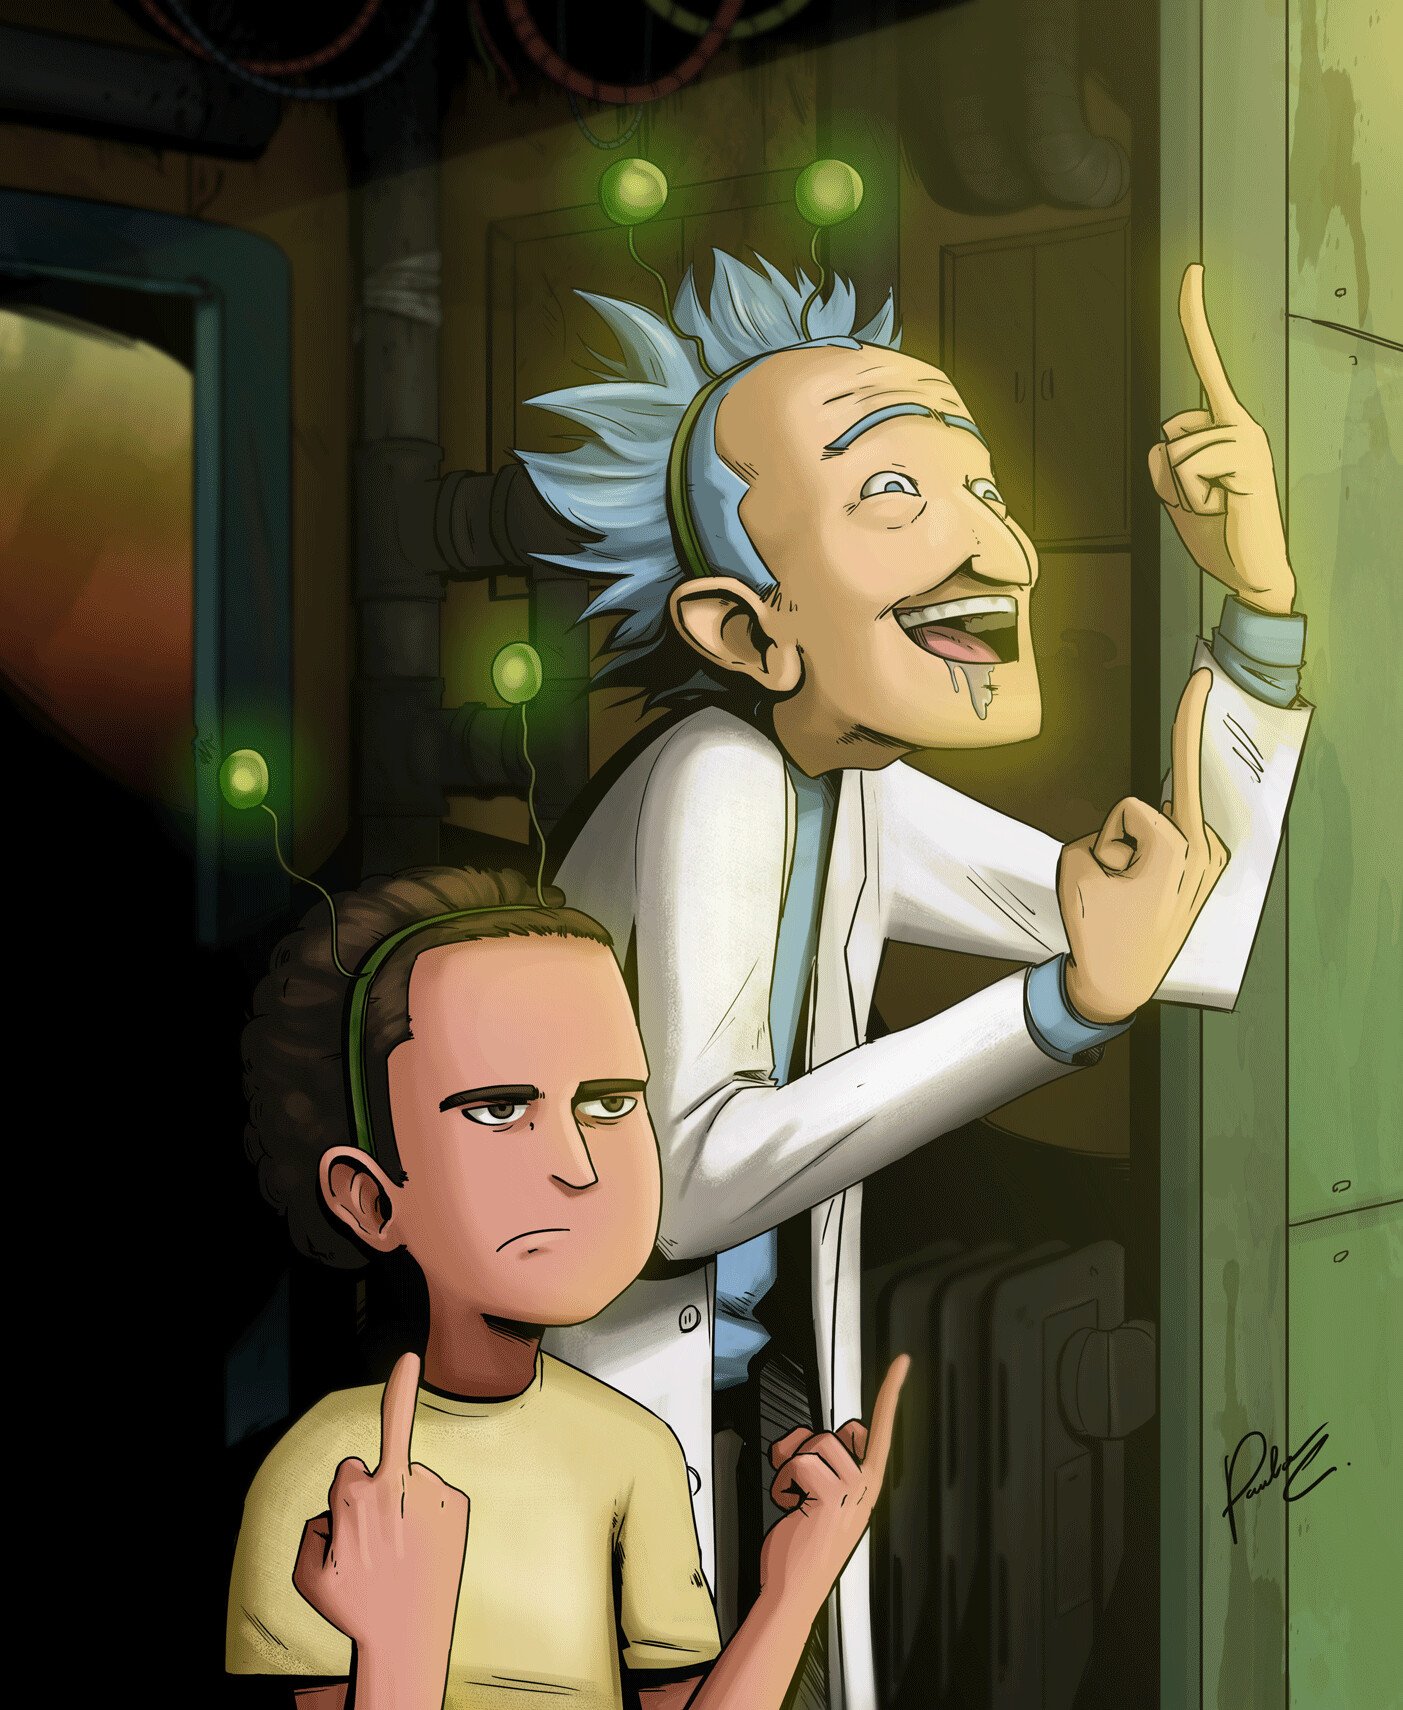 Paulo Brancher Among Worlds & Morty